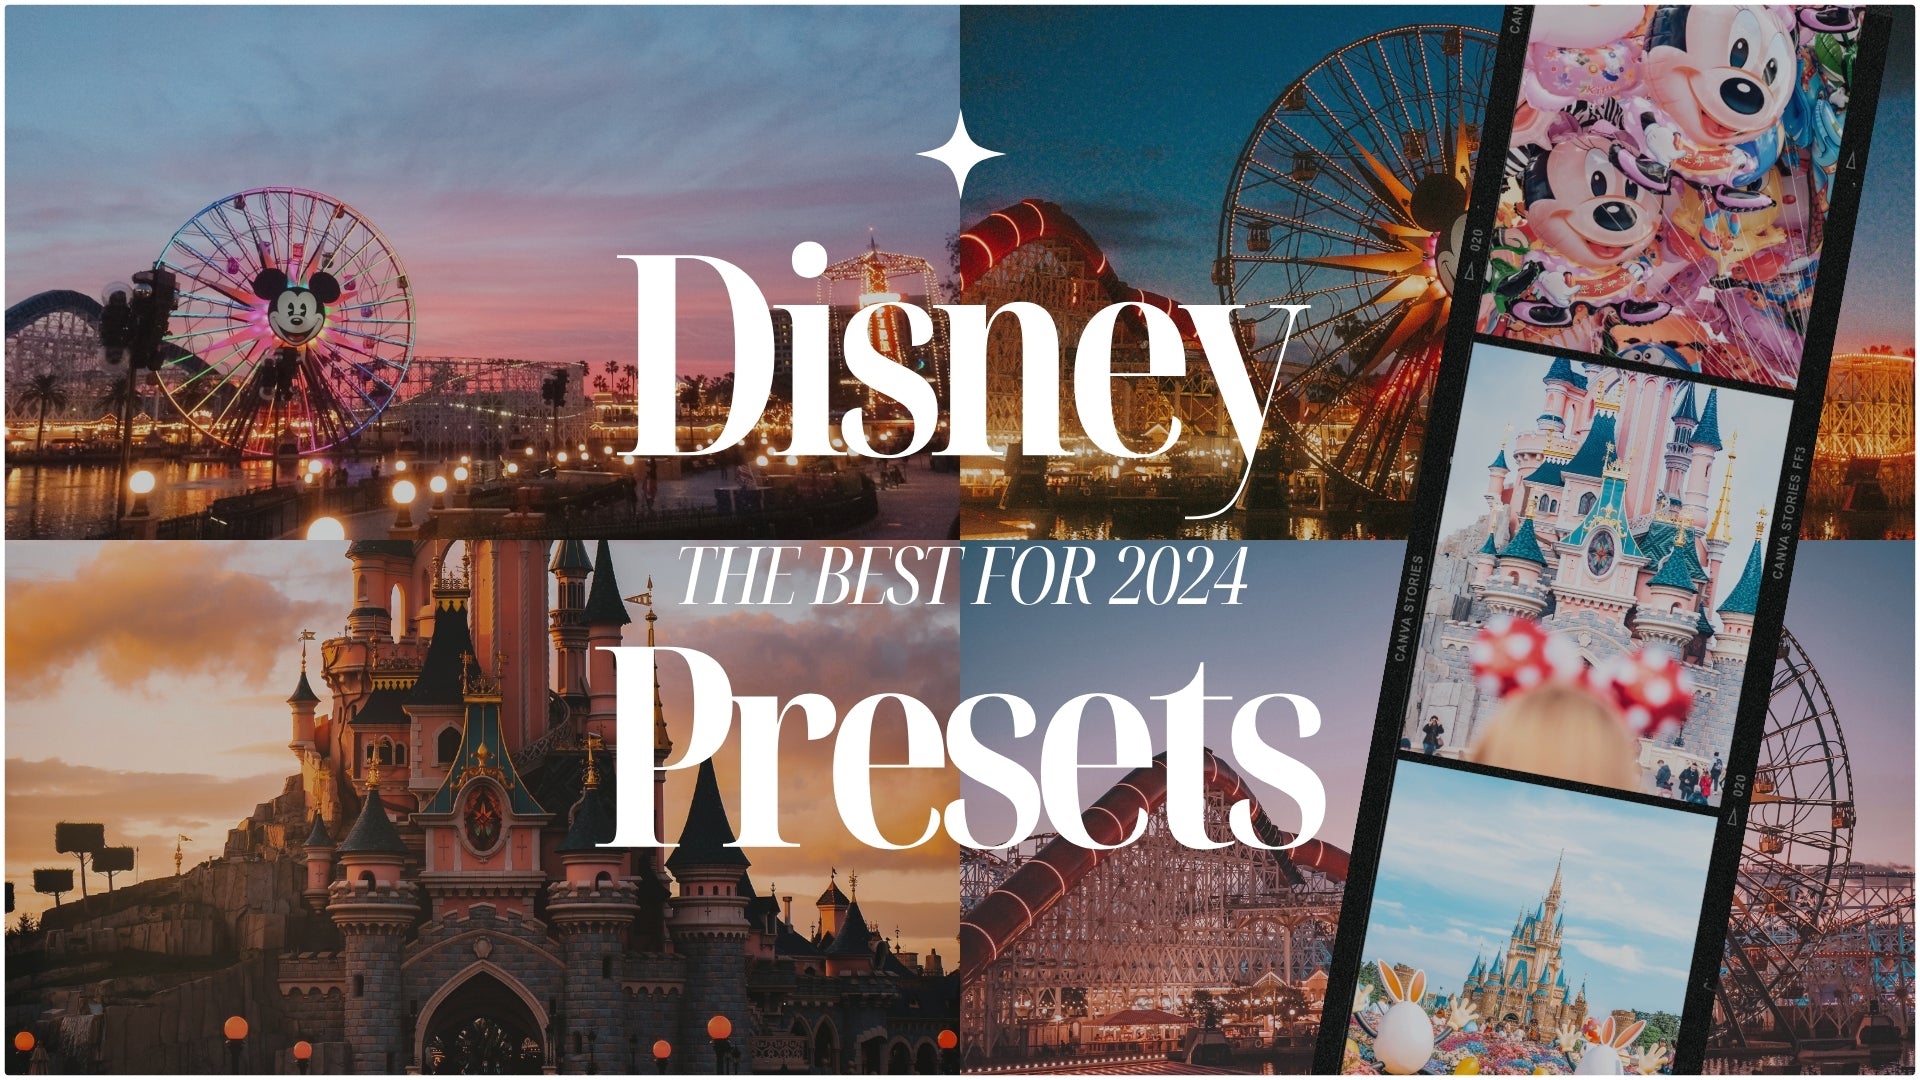 The Best Disney Presets For Disneyland And Disney World By Lou And Marks Presets